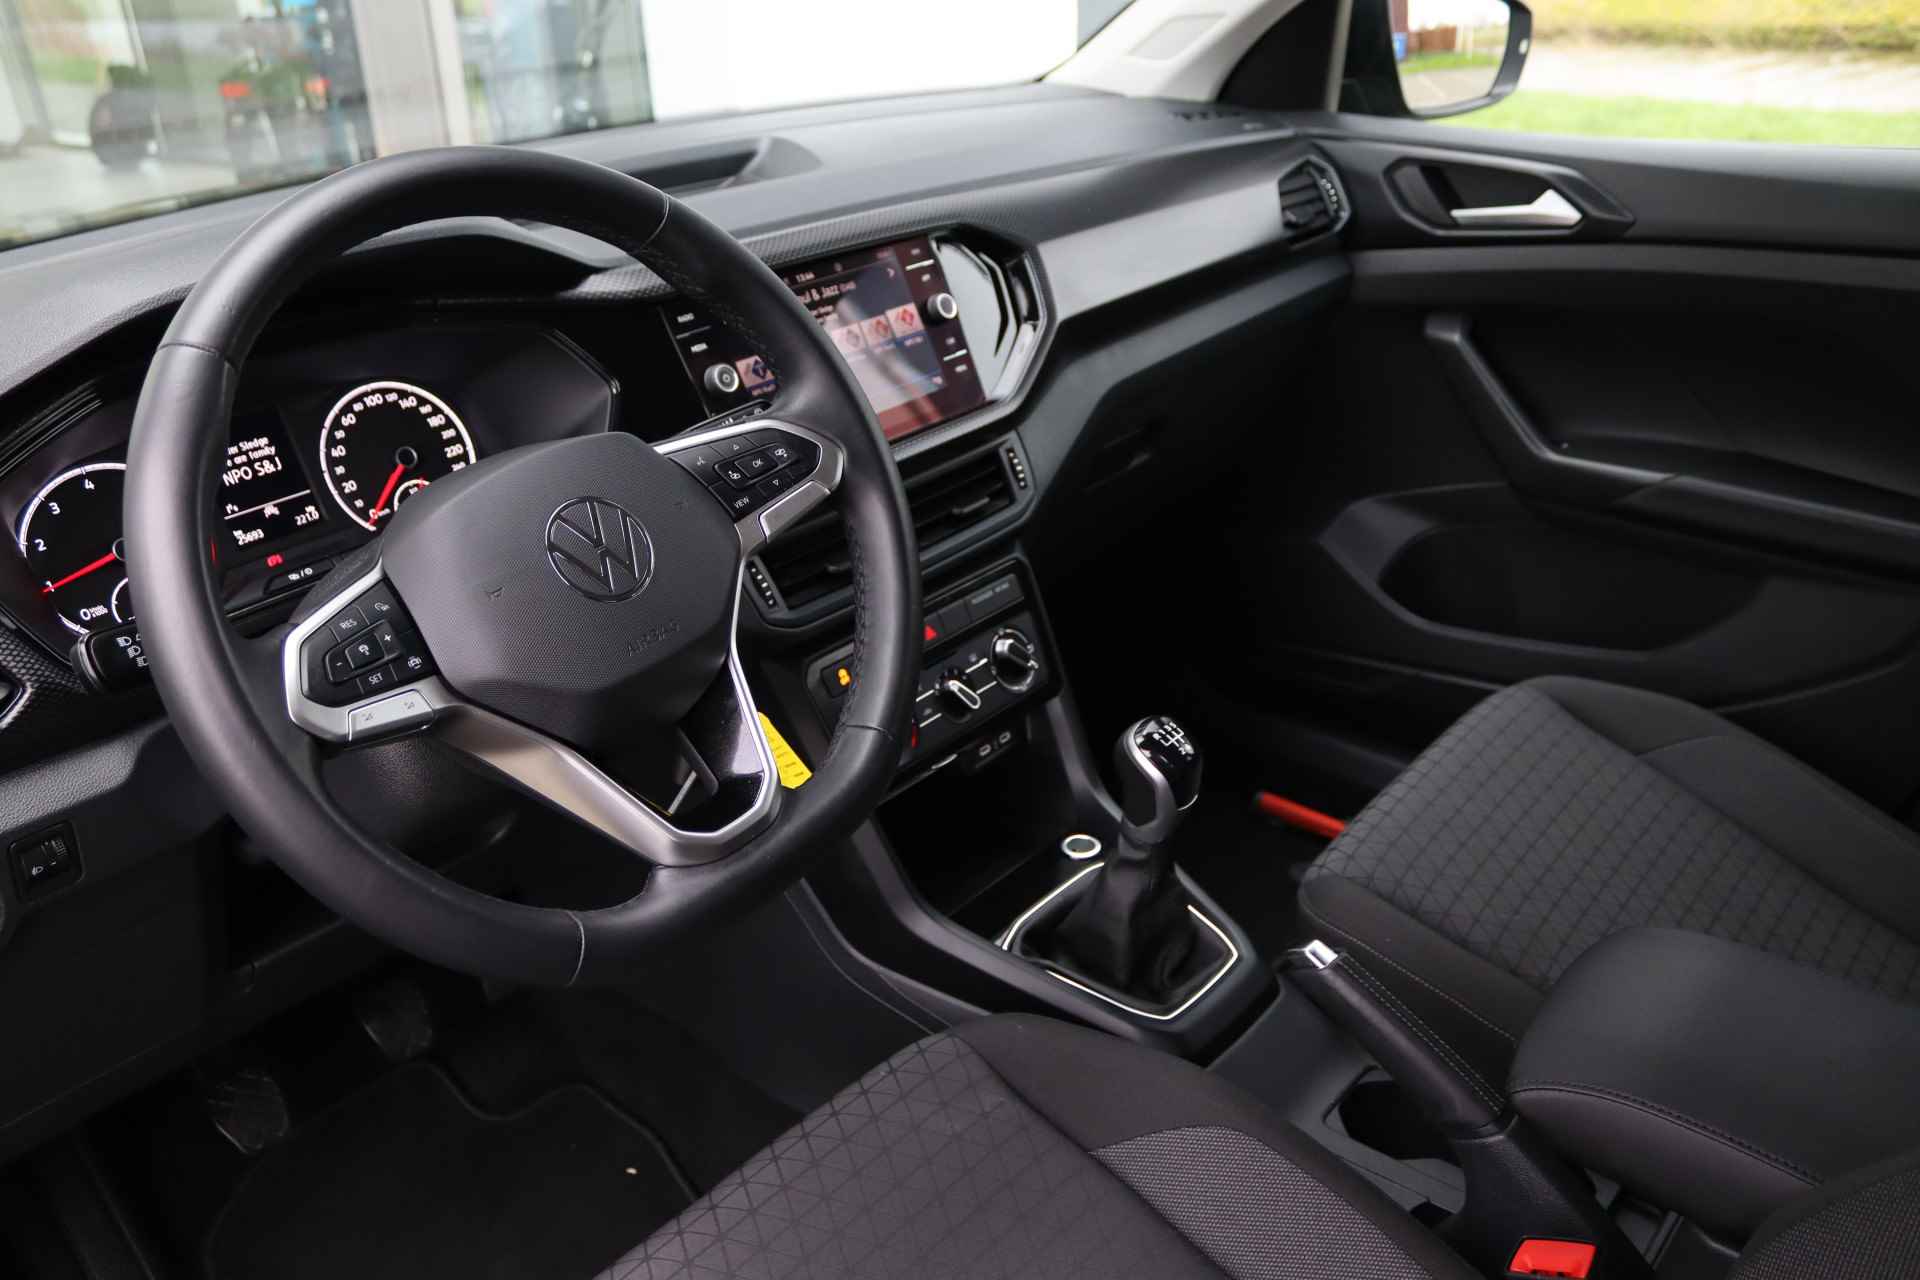 Volkswagen T-Cross 1.0 TSI 95 pk Life | App-connect  | PDC voor & achter | 16" LM | Adaptive Cruise - 14/38